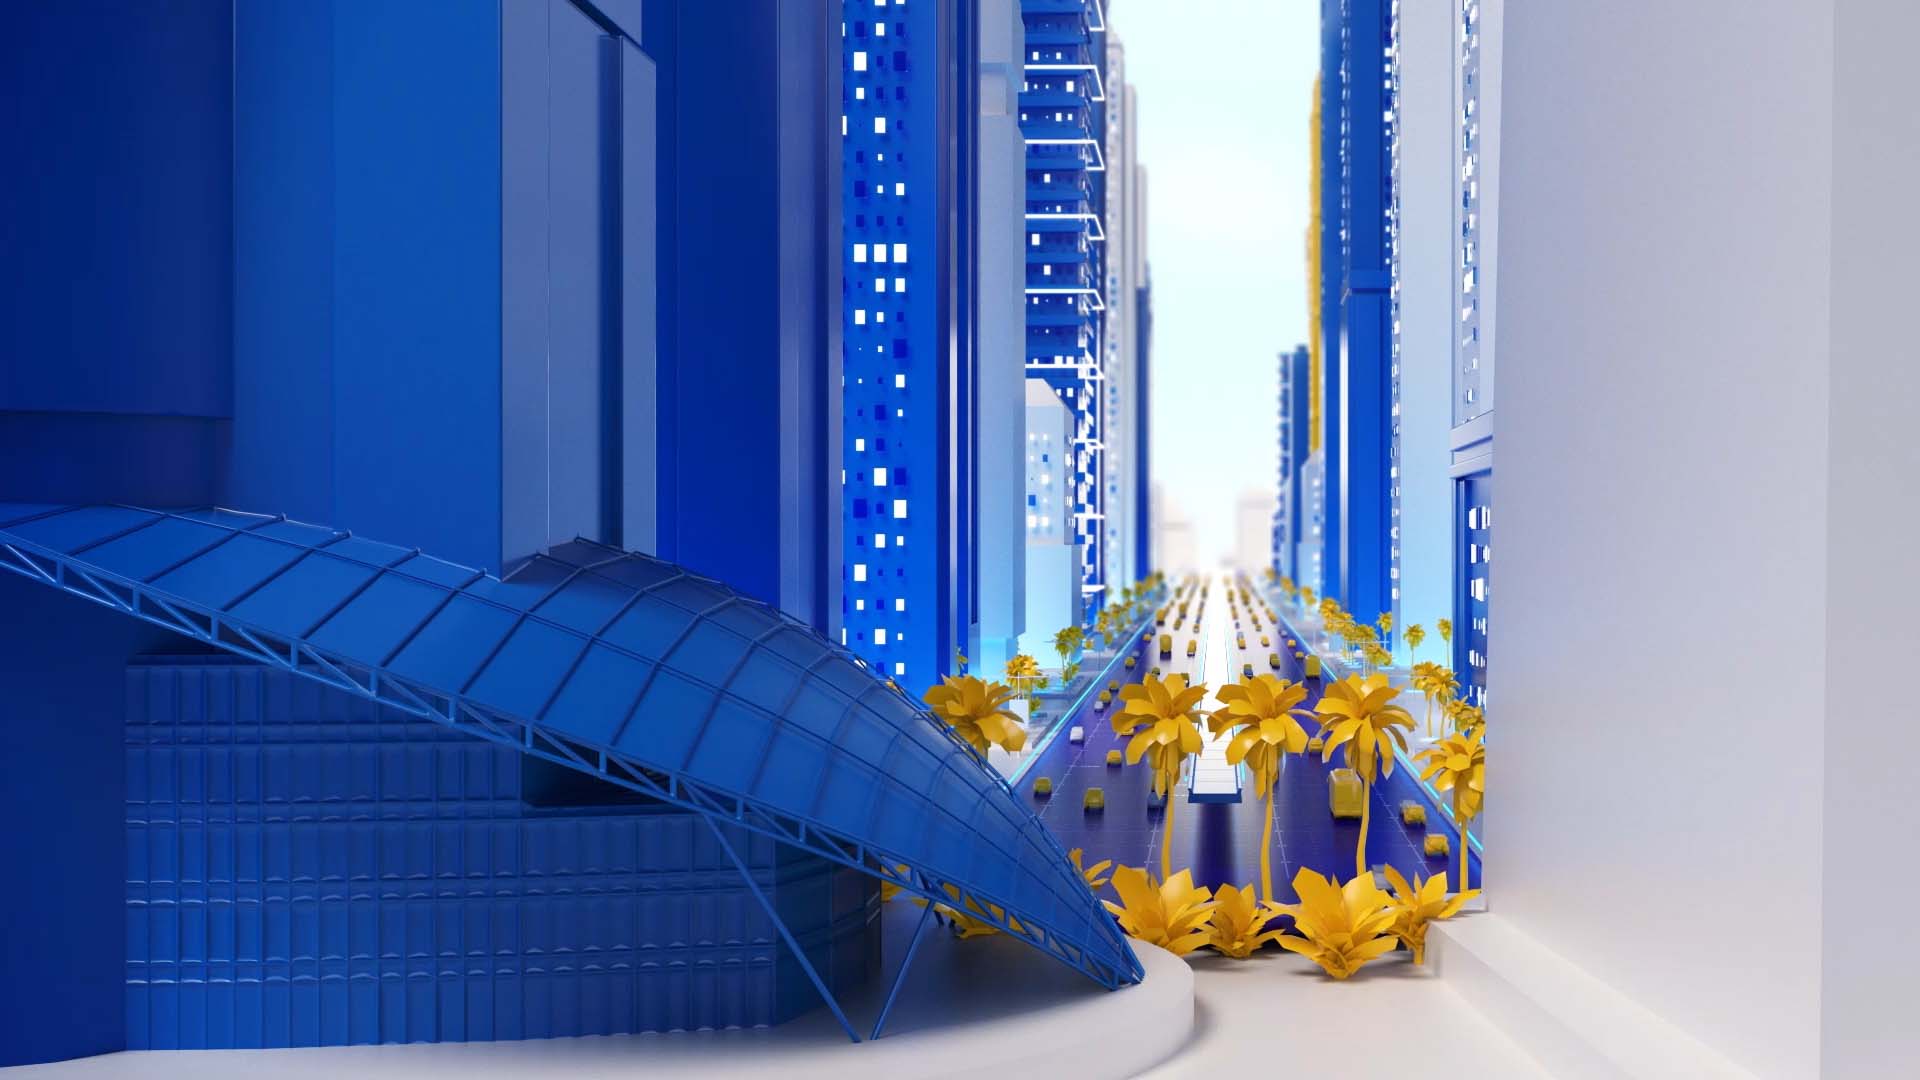 3D animation for brand launch campaign by We Are Alive, a video company based in Dubai and the UK